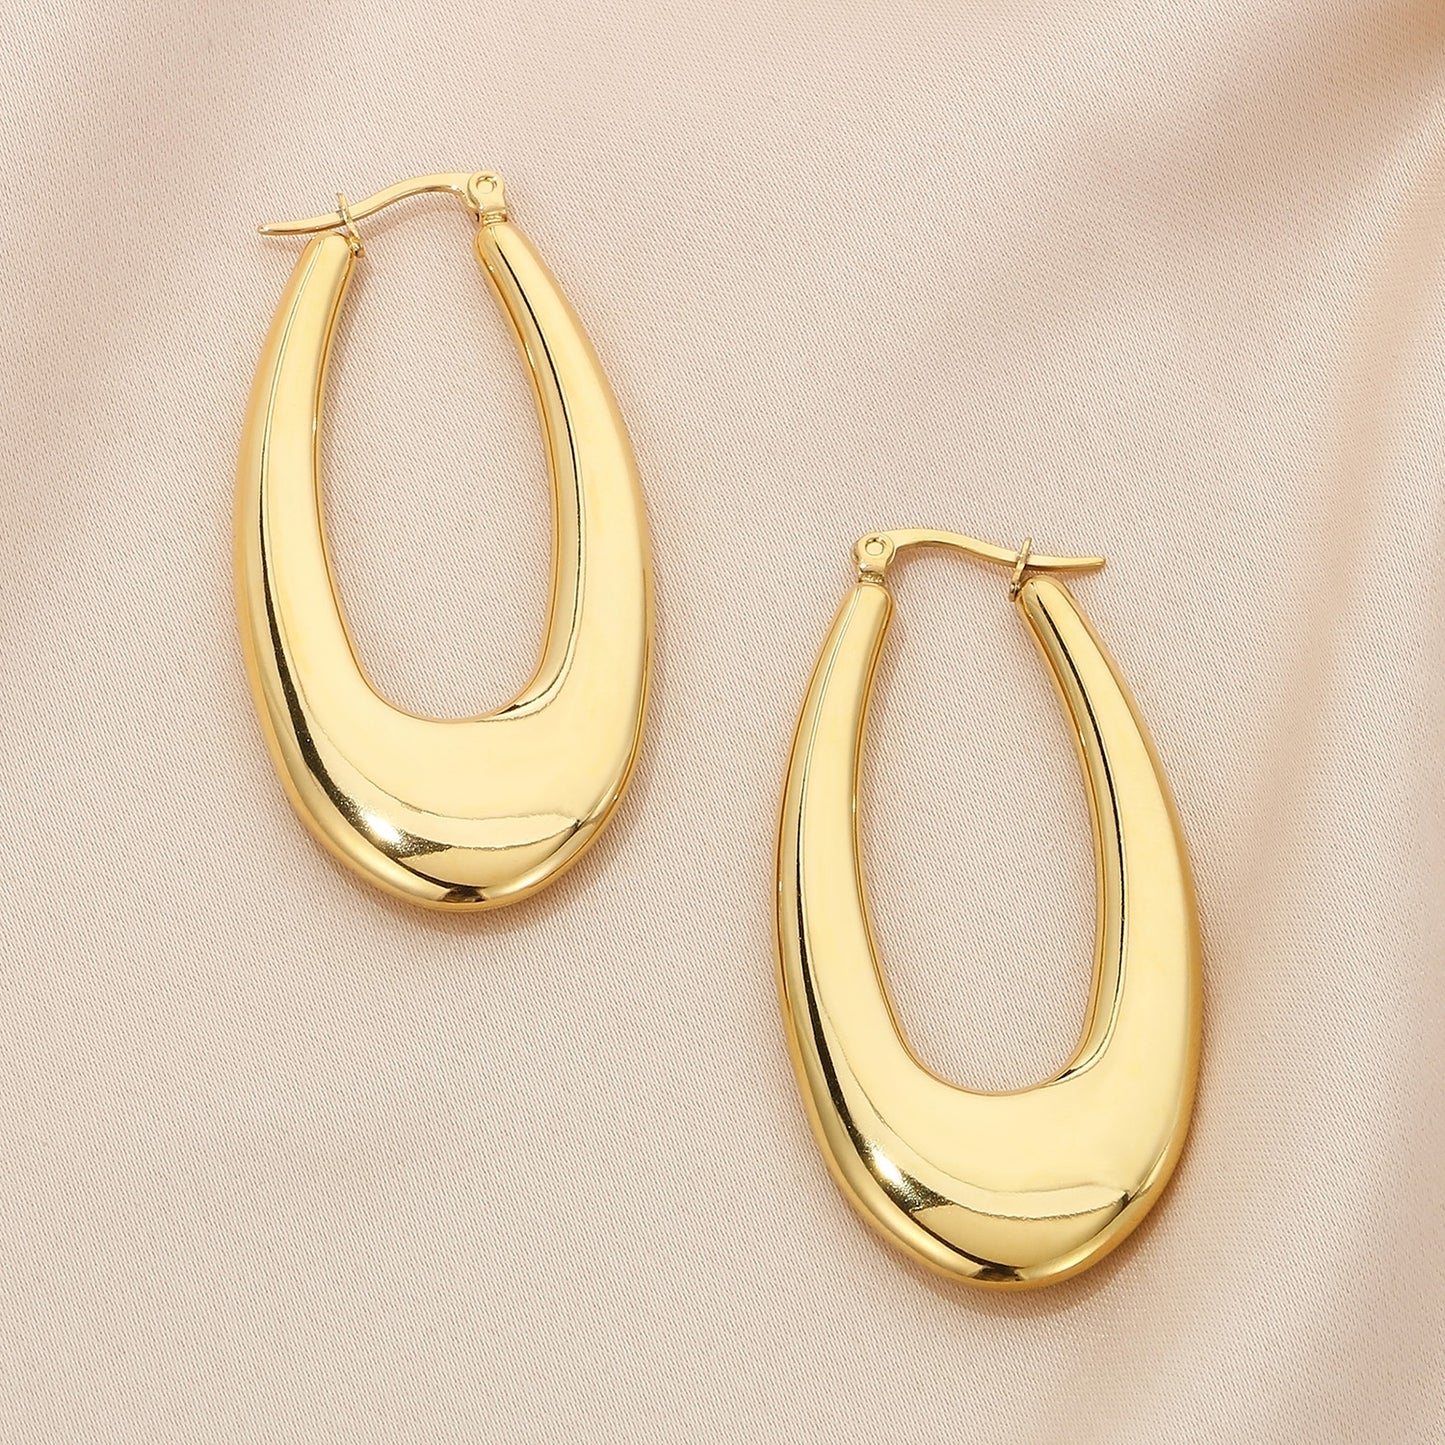 Stainless Steel Hinged Hoop Earrings Style D Gold One Size